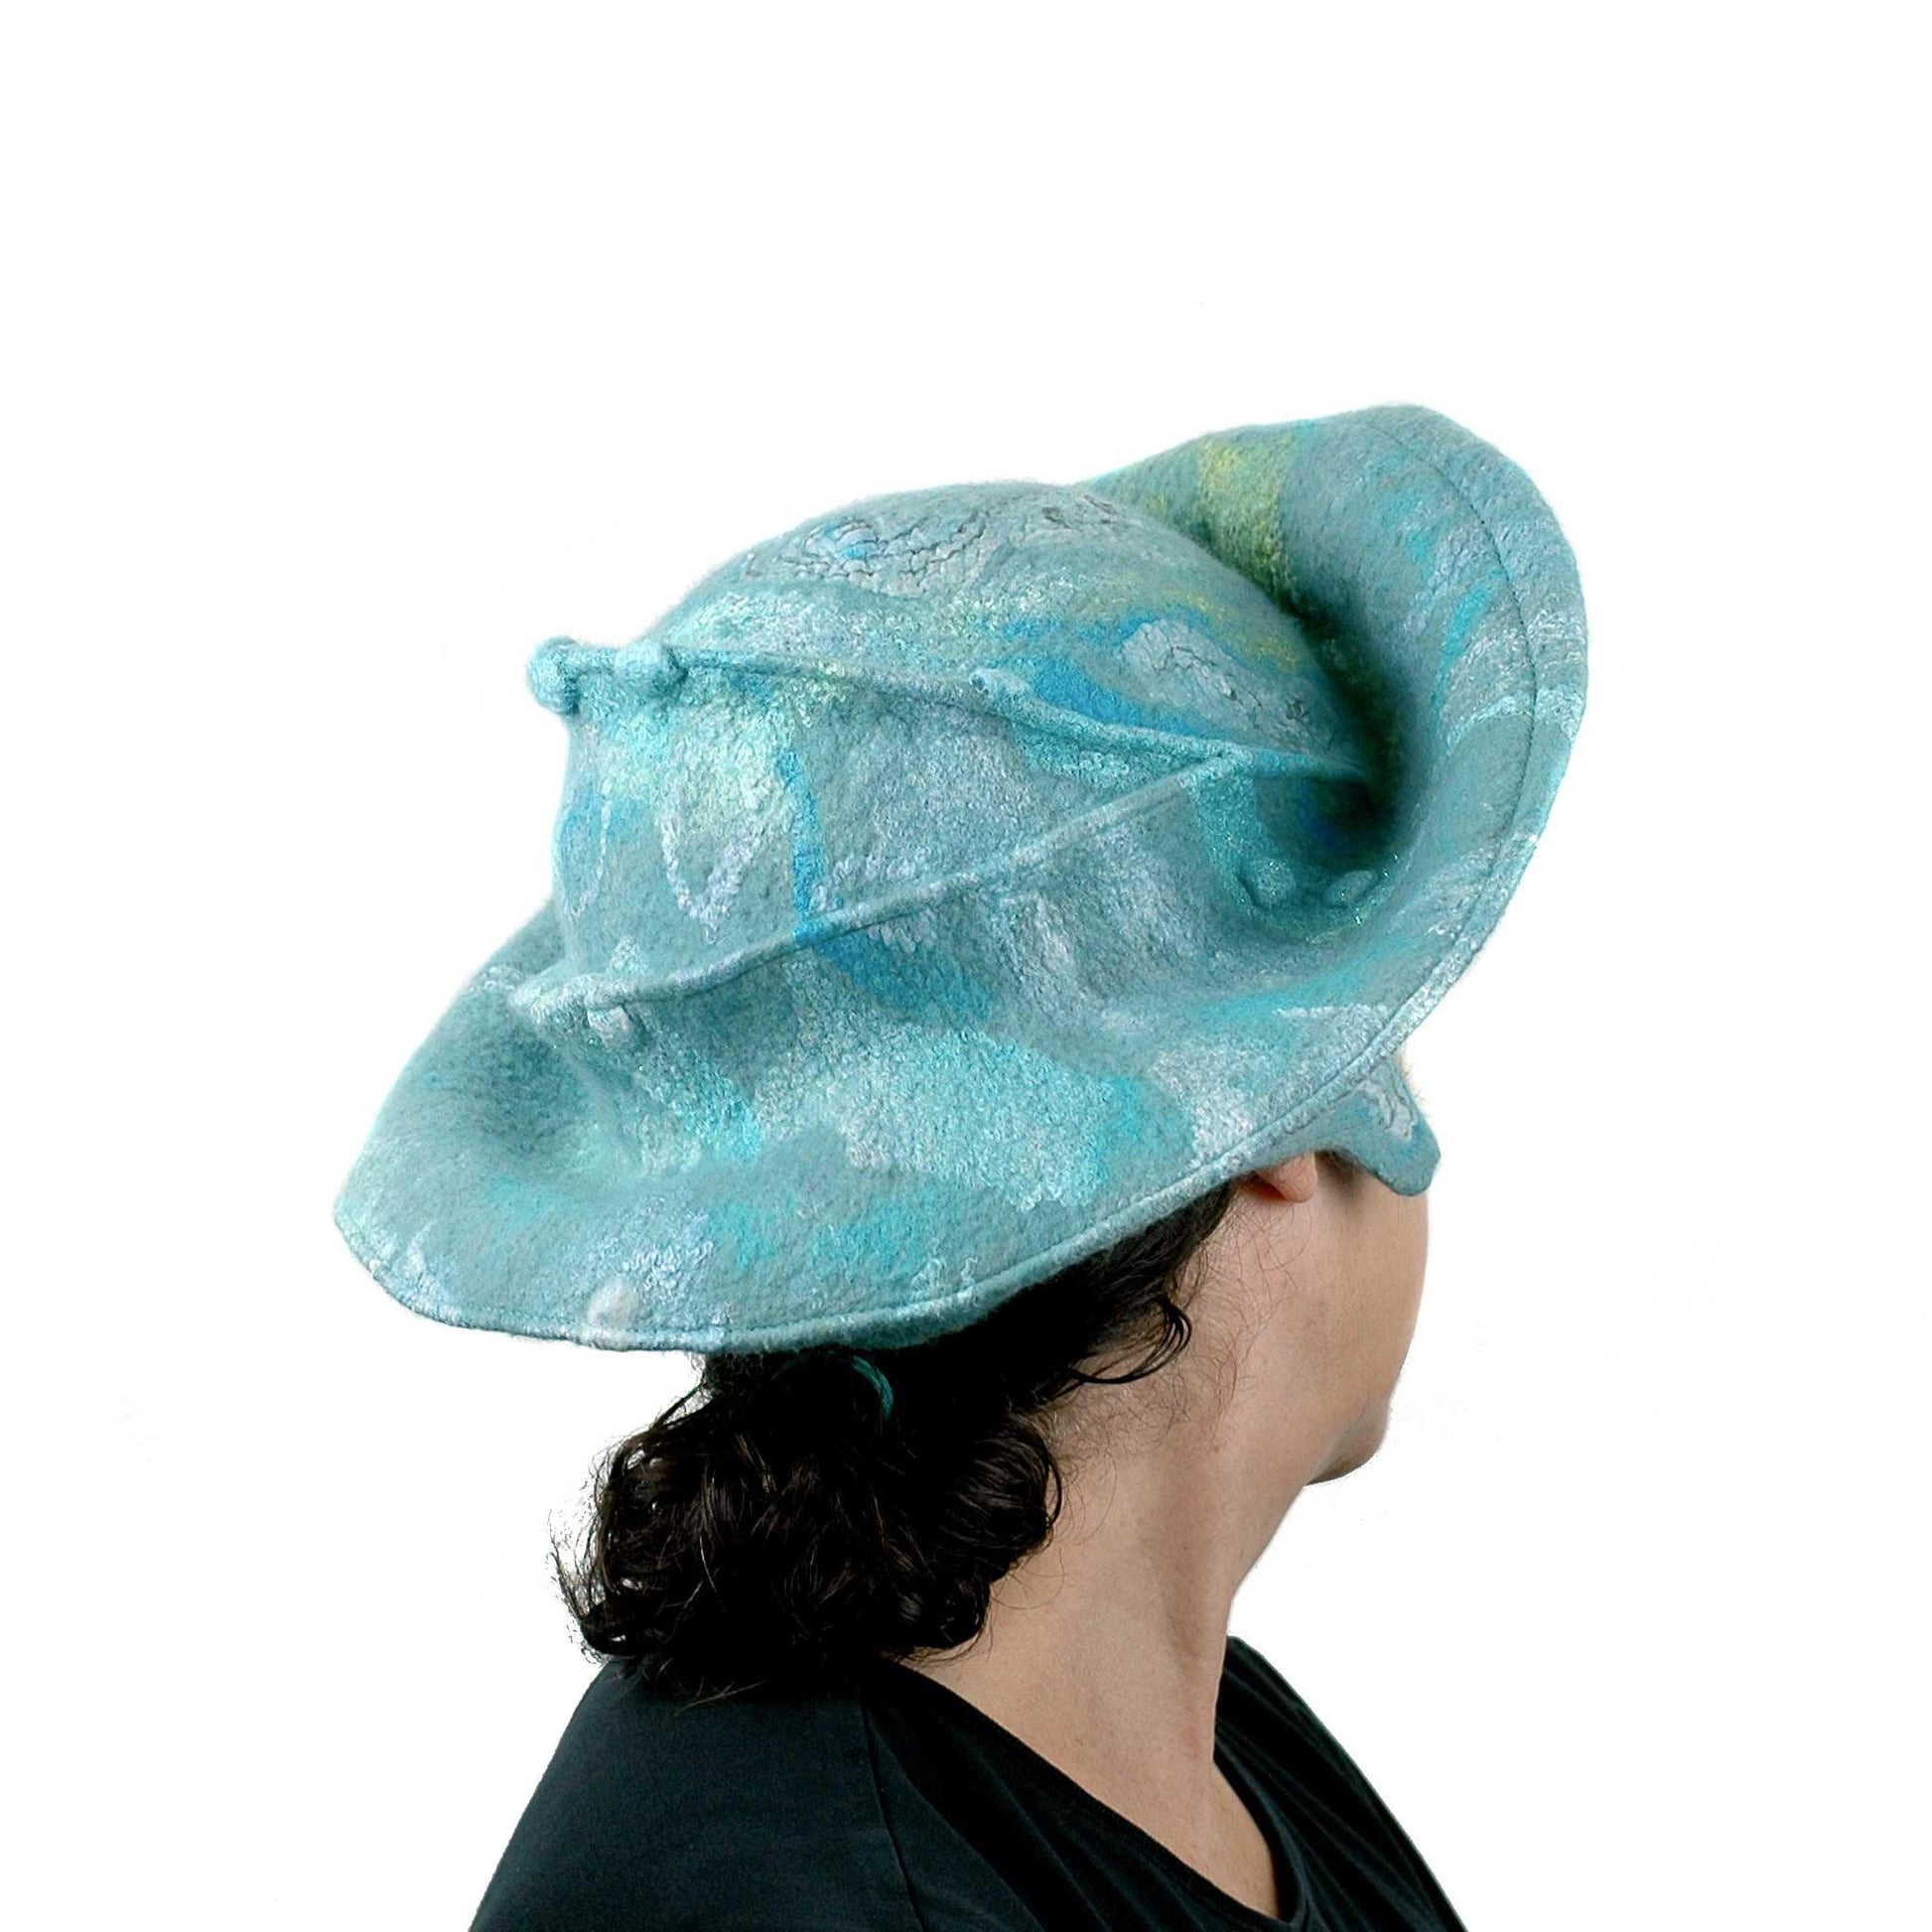 Seafoam Green Medieval Style Felted Hat that Covers Ears - back view